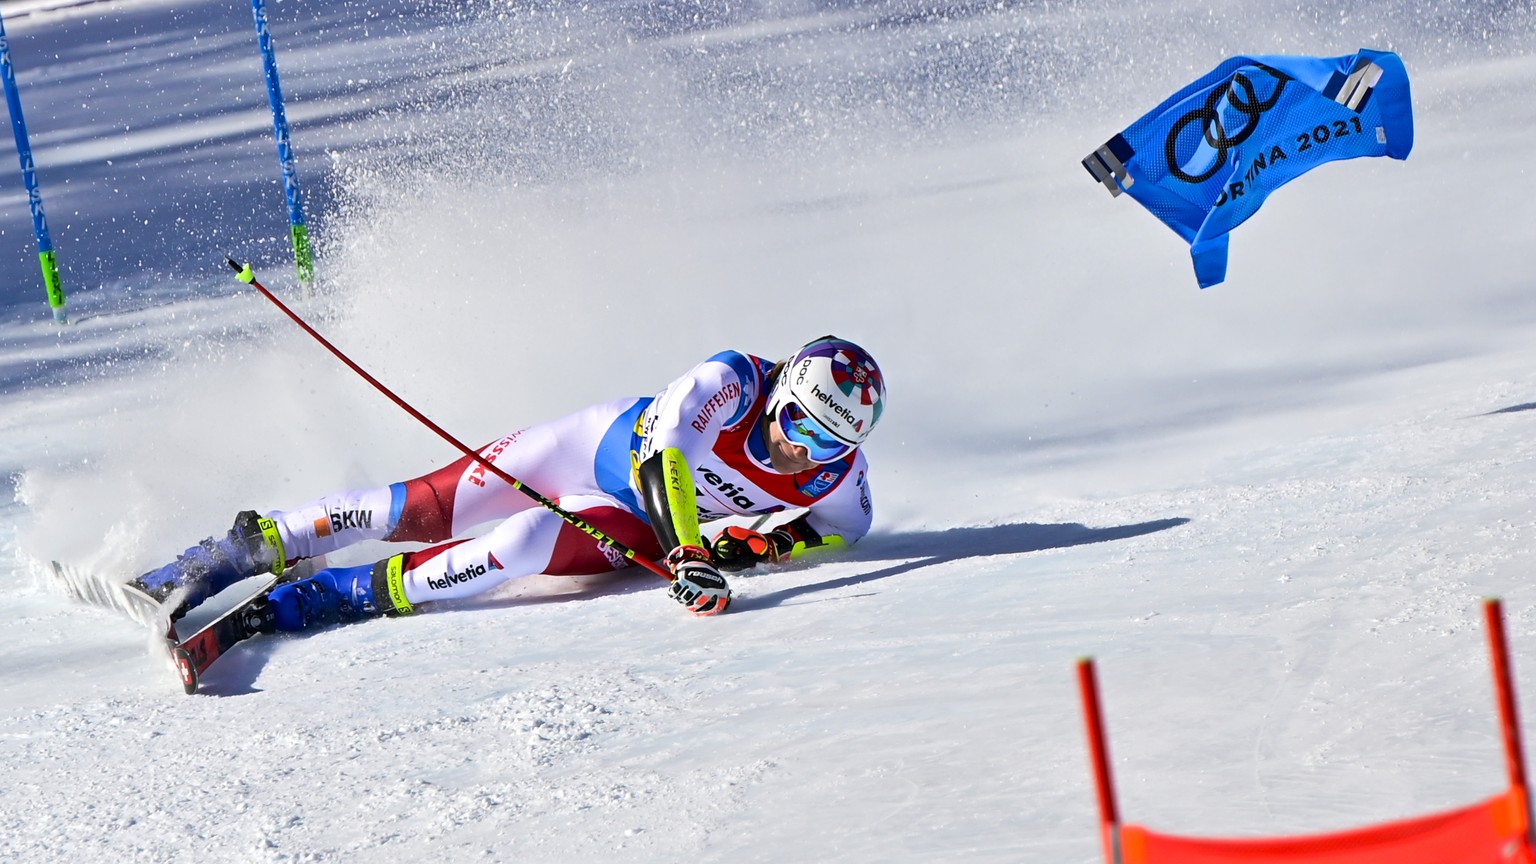 Switzerland&#039;s Marco Odermatt is eliminated during the first run of the men&#039;s Giant Slalom race at the 2021 FIS Alpine Skiing World Championships in Cortina d&#039;Ampezzo, Italy, on Friday,  ...